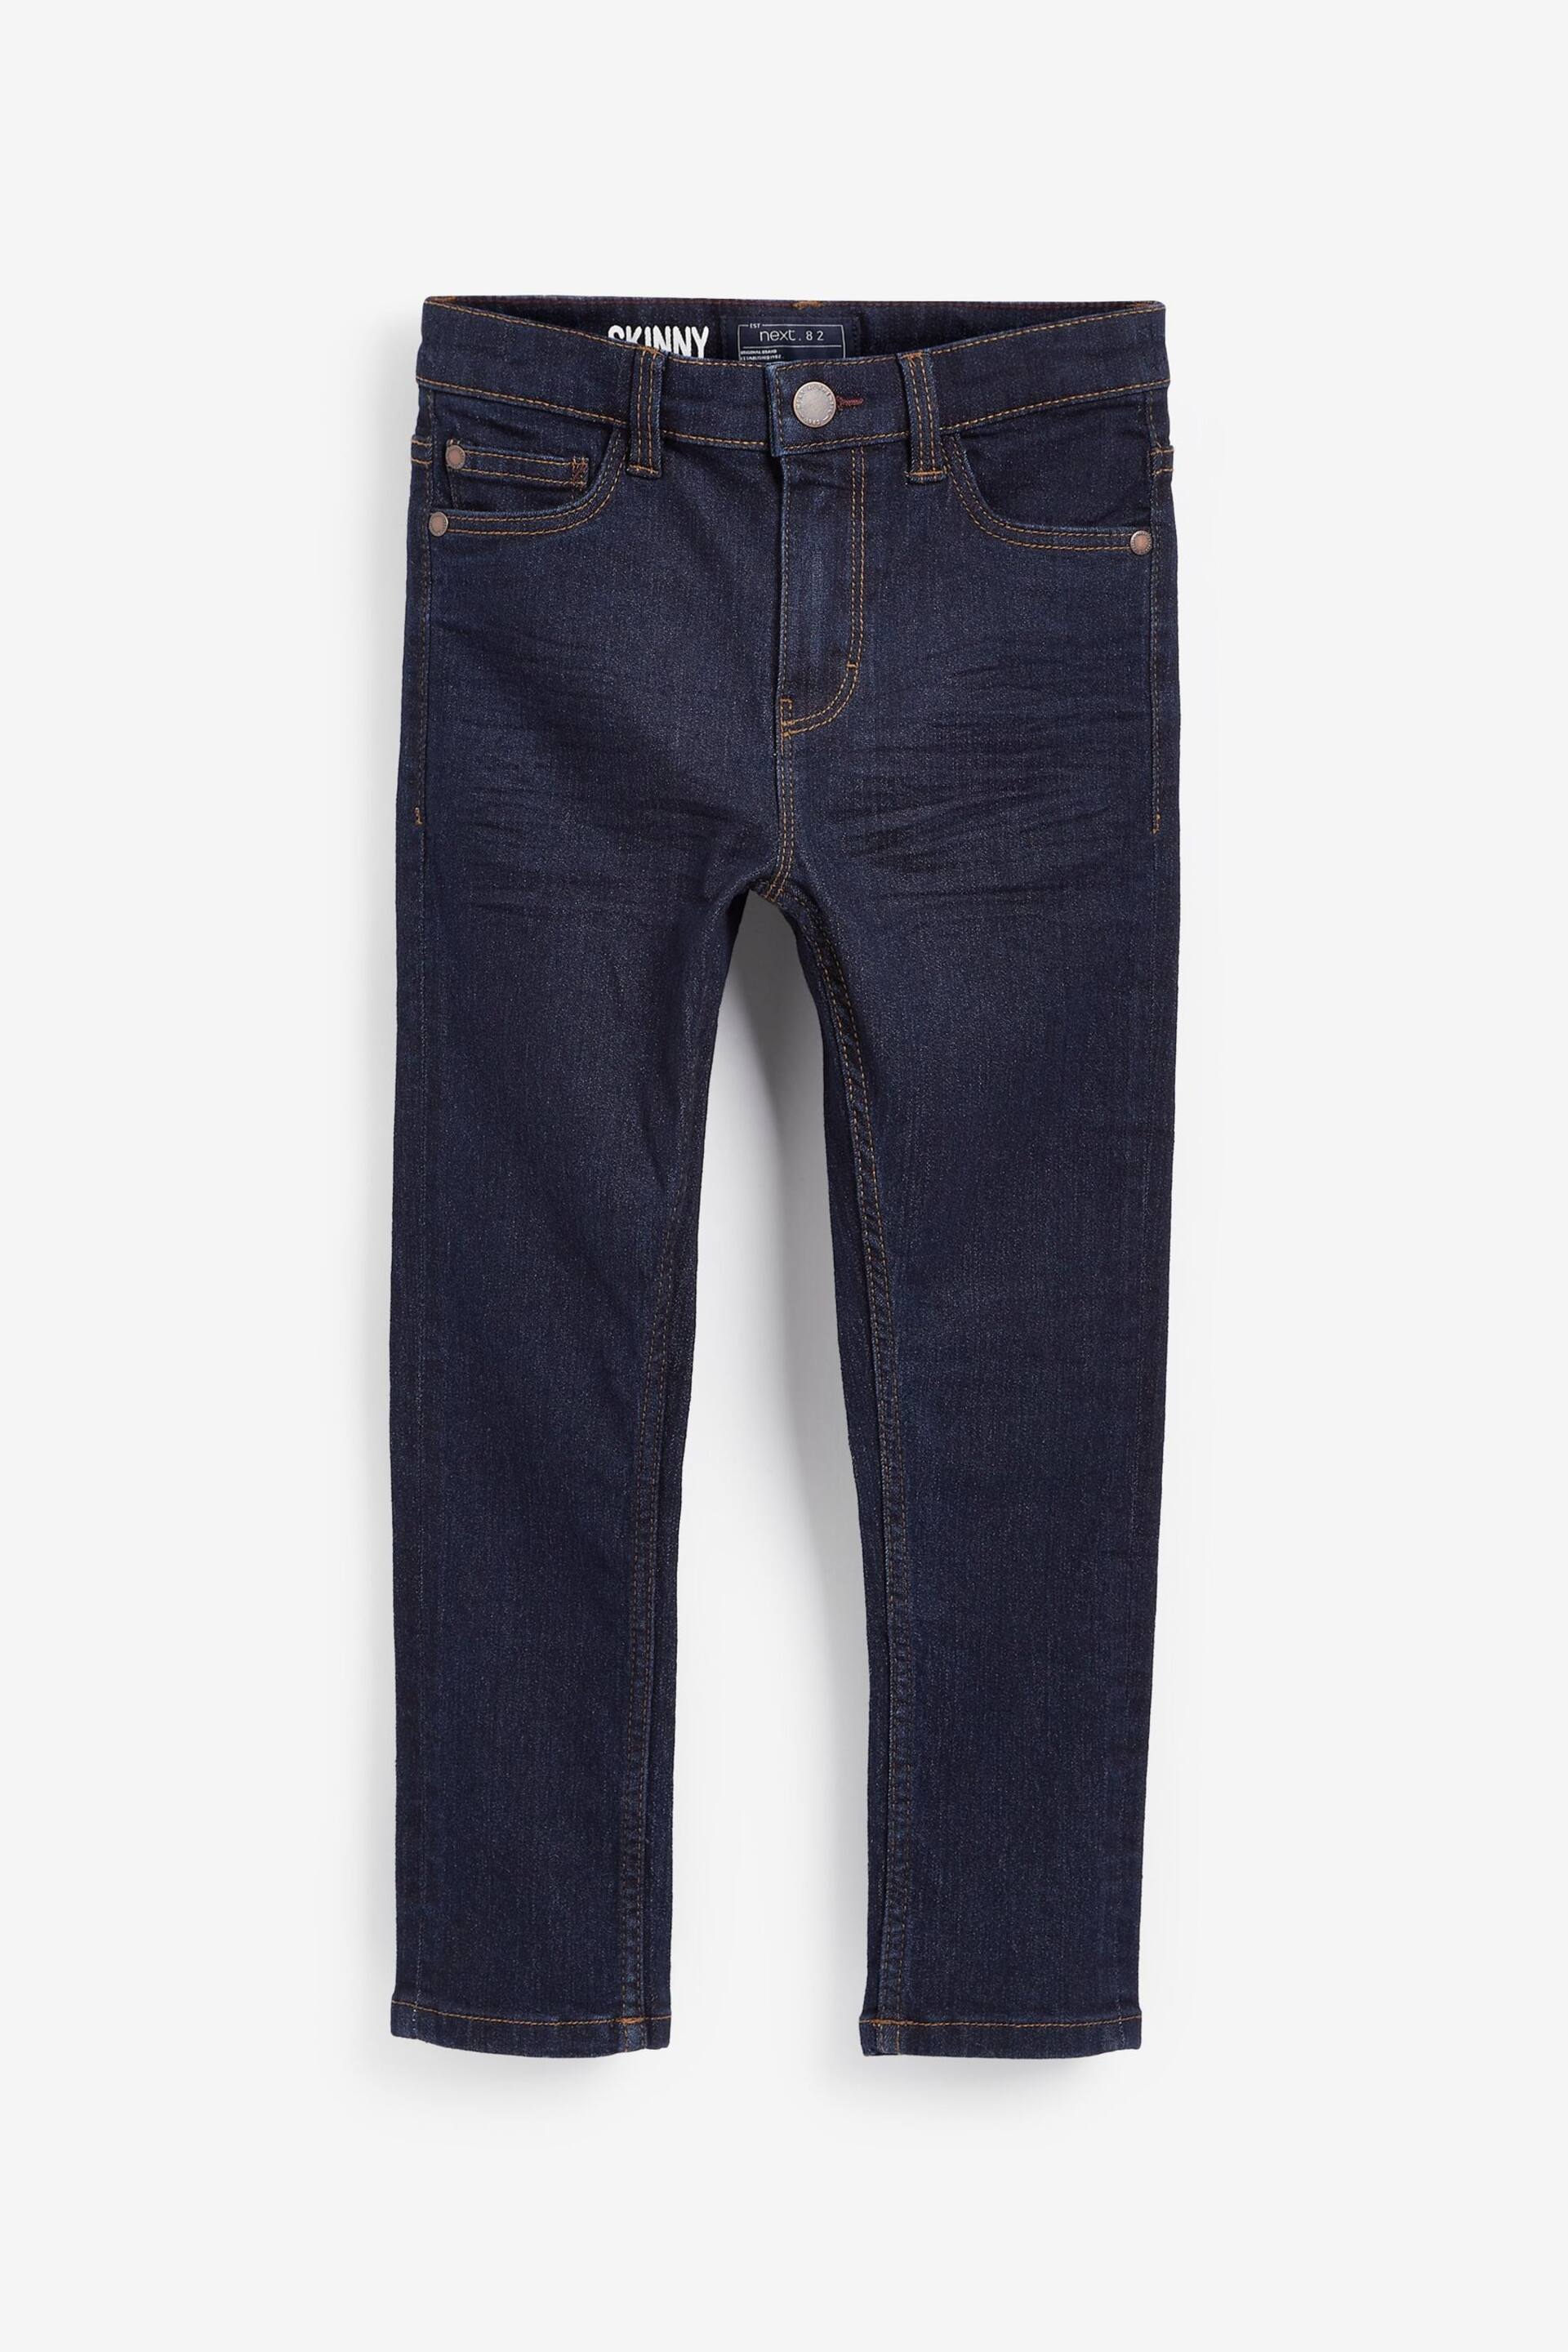 Blue Dark Skinny Fit Cotton Rich Stretch Jeans (3-17yrs) - Image 1 of 3